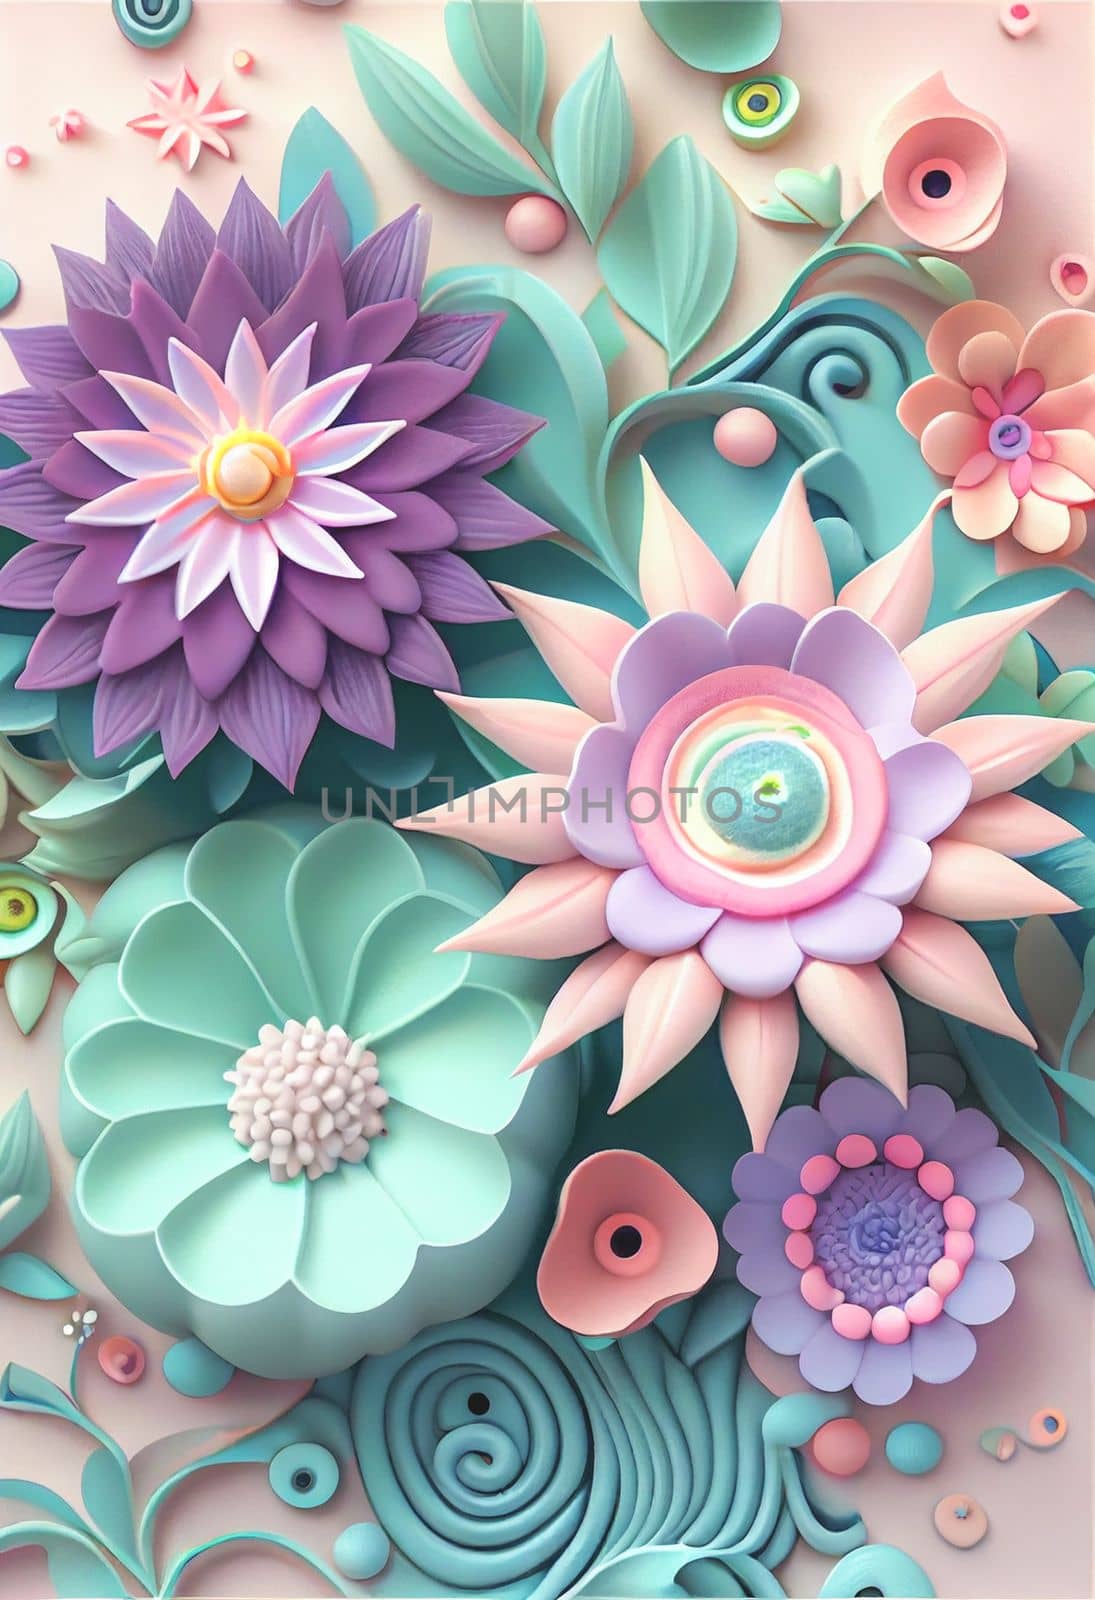 Cute 3D pastel passiflora flowers on a peaceful pastel background. Soft colors bring a soothing aesthetic. by FokasuArt